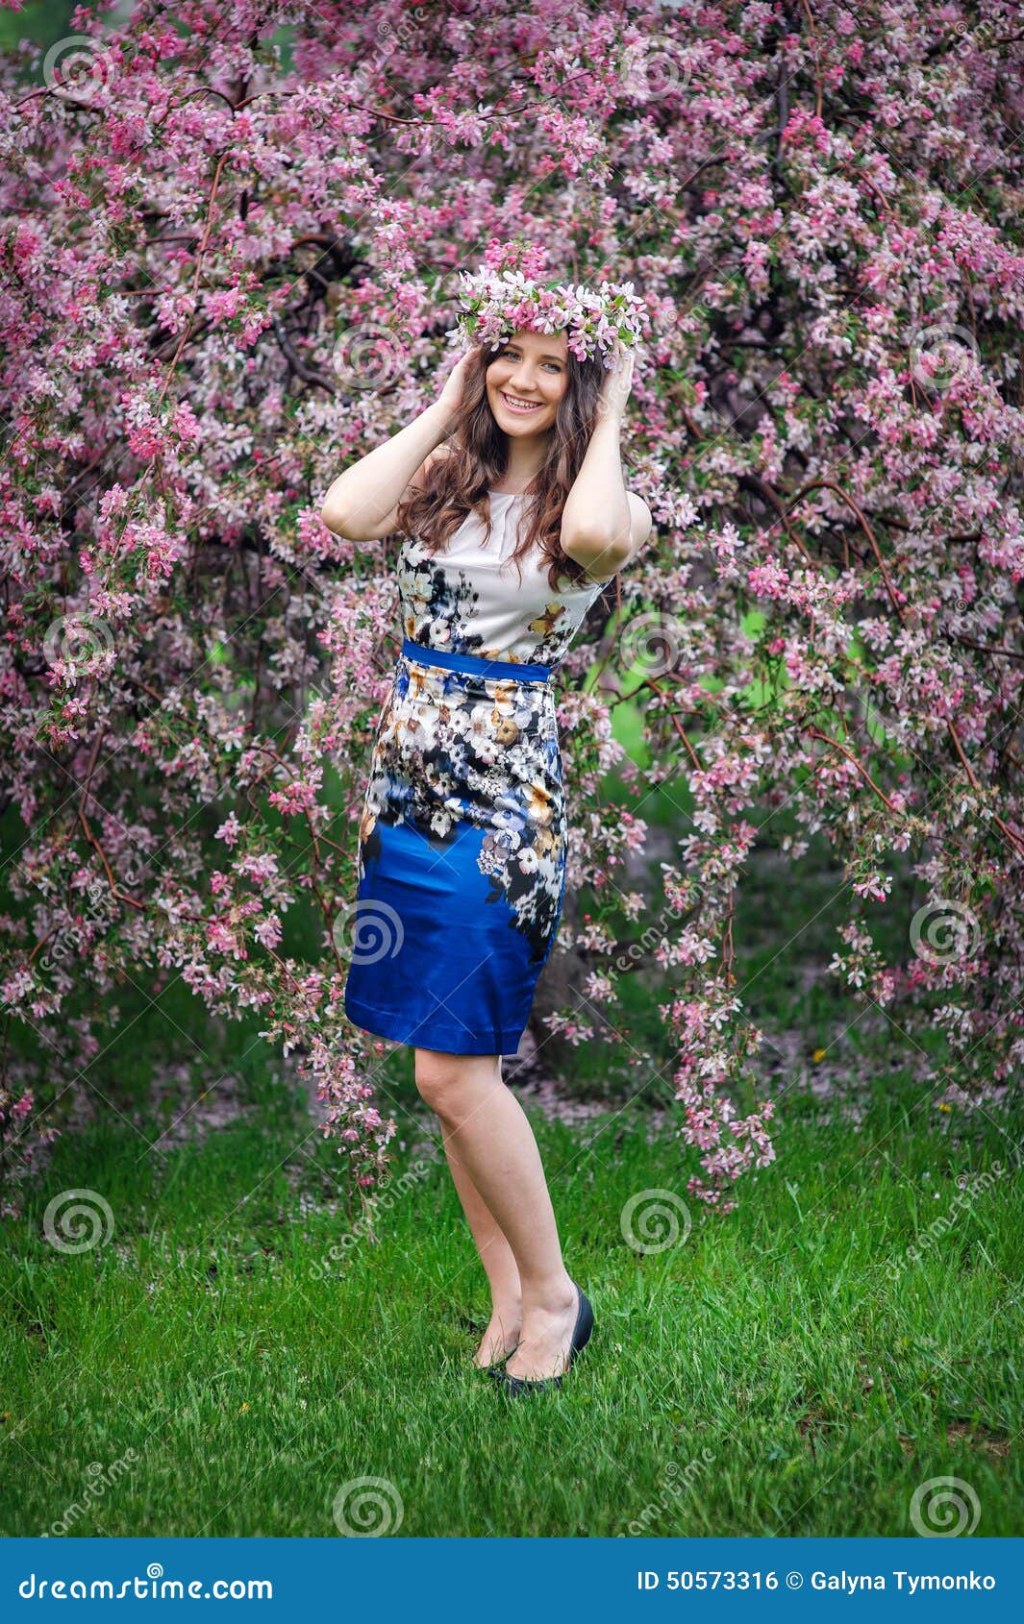 Picture of: Beautiful Girl in the Lush Garden Laughing Stock Photo – Image of